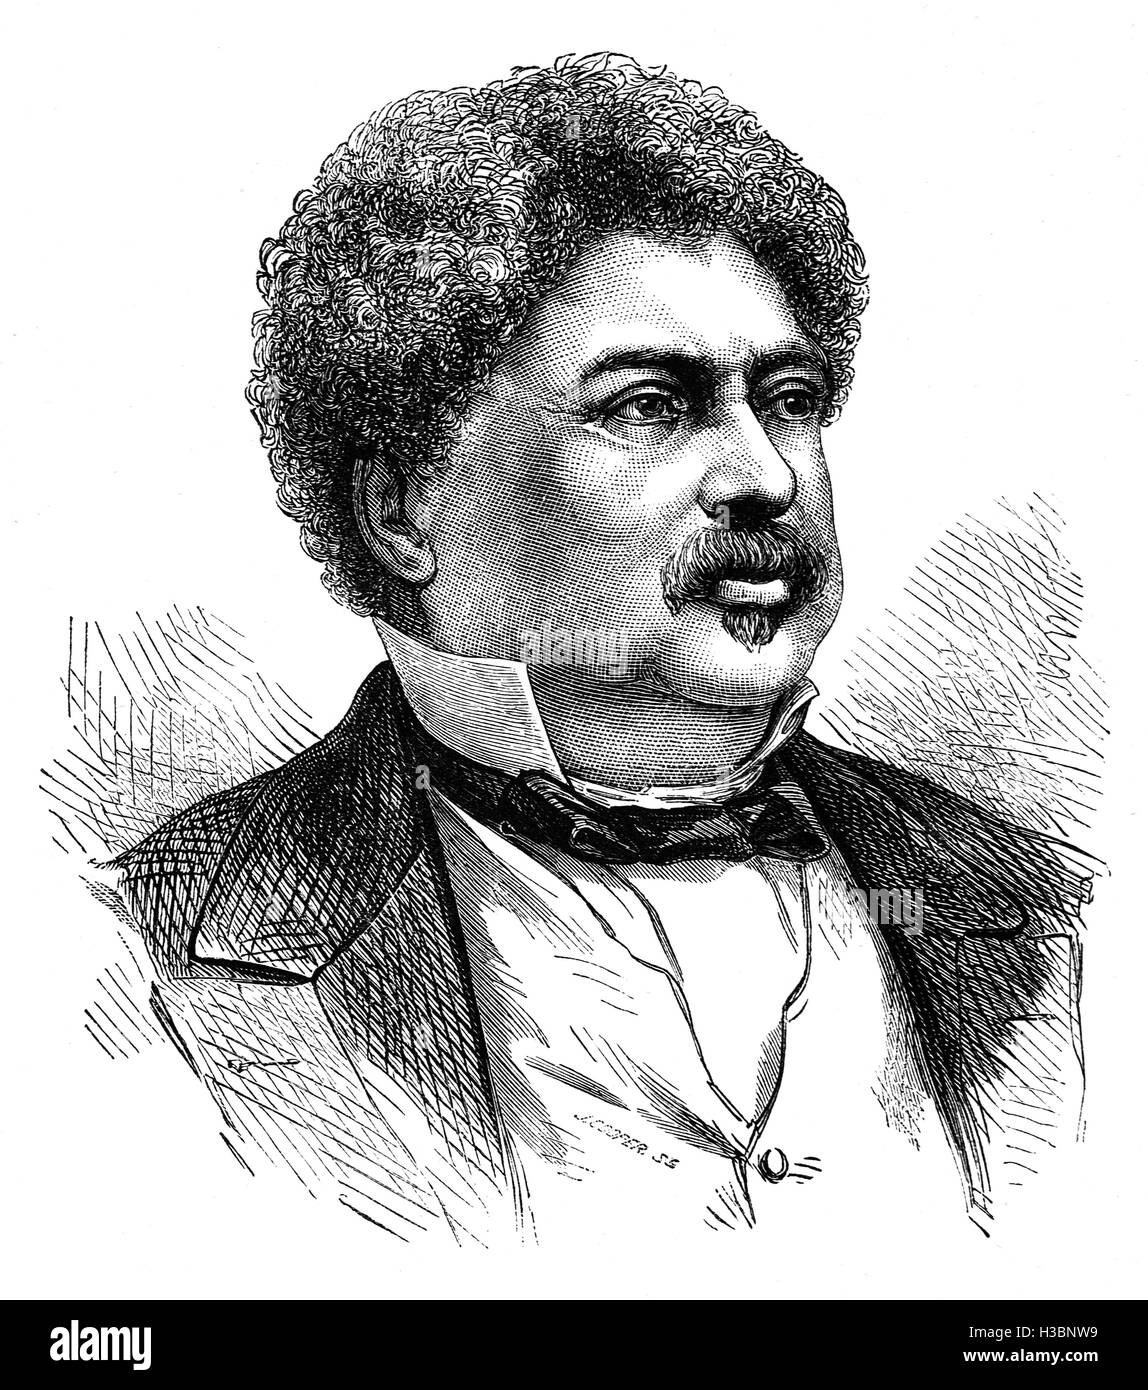 Alexandre Dumas (1802 – 1870),  was a French writer of historical novels of high adventure  including The Count of Monte Cristo and The Three Musketeers. At his death in December 1870, he was buried at his birthplace of Villers-Cotterêts in the department of Aisne. His death was overshadowed by the Franco-Prussian War. Stock Photo